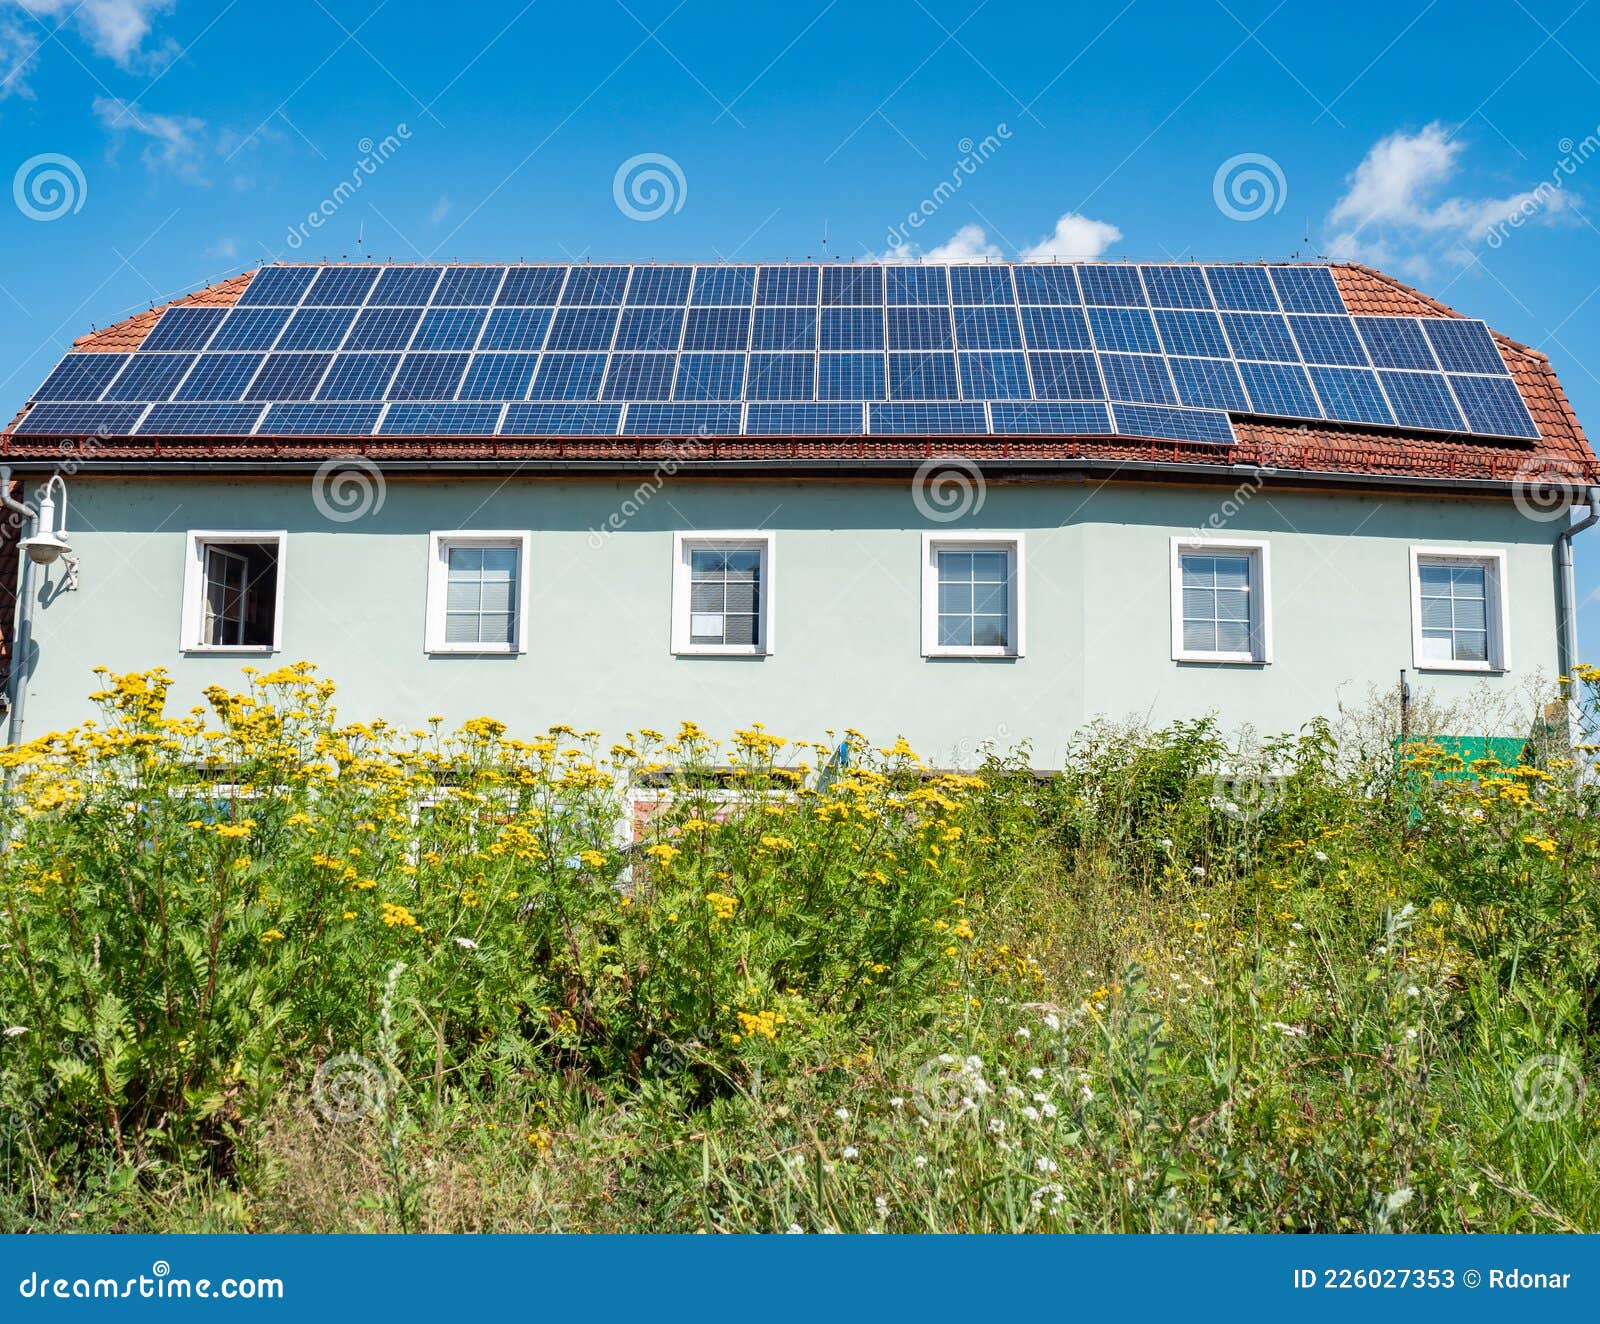 solar panels installed on the red tiled roof of a house  europe